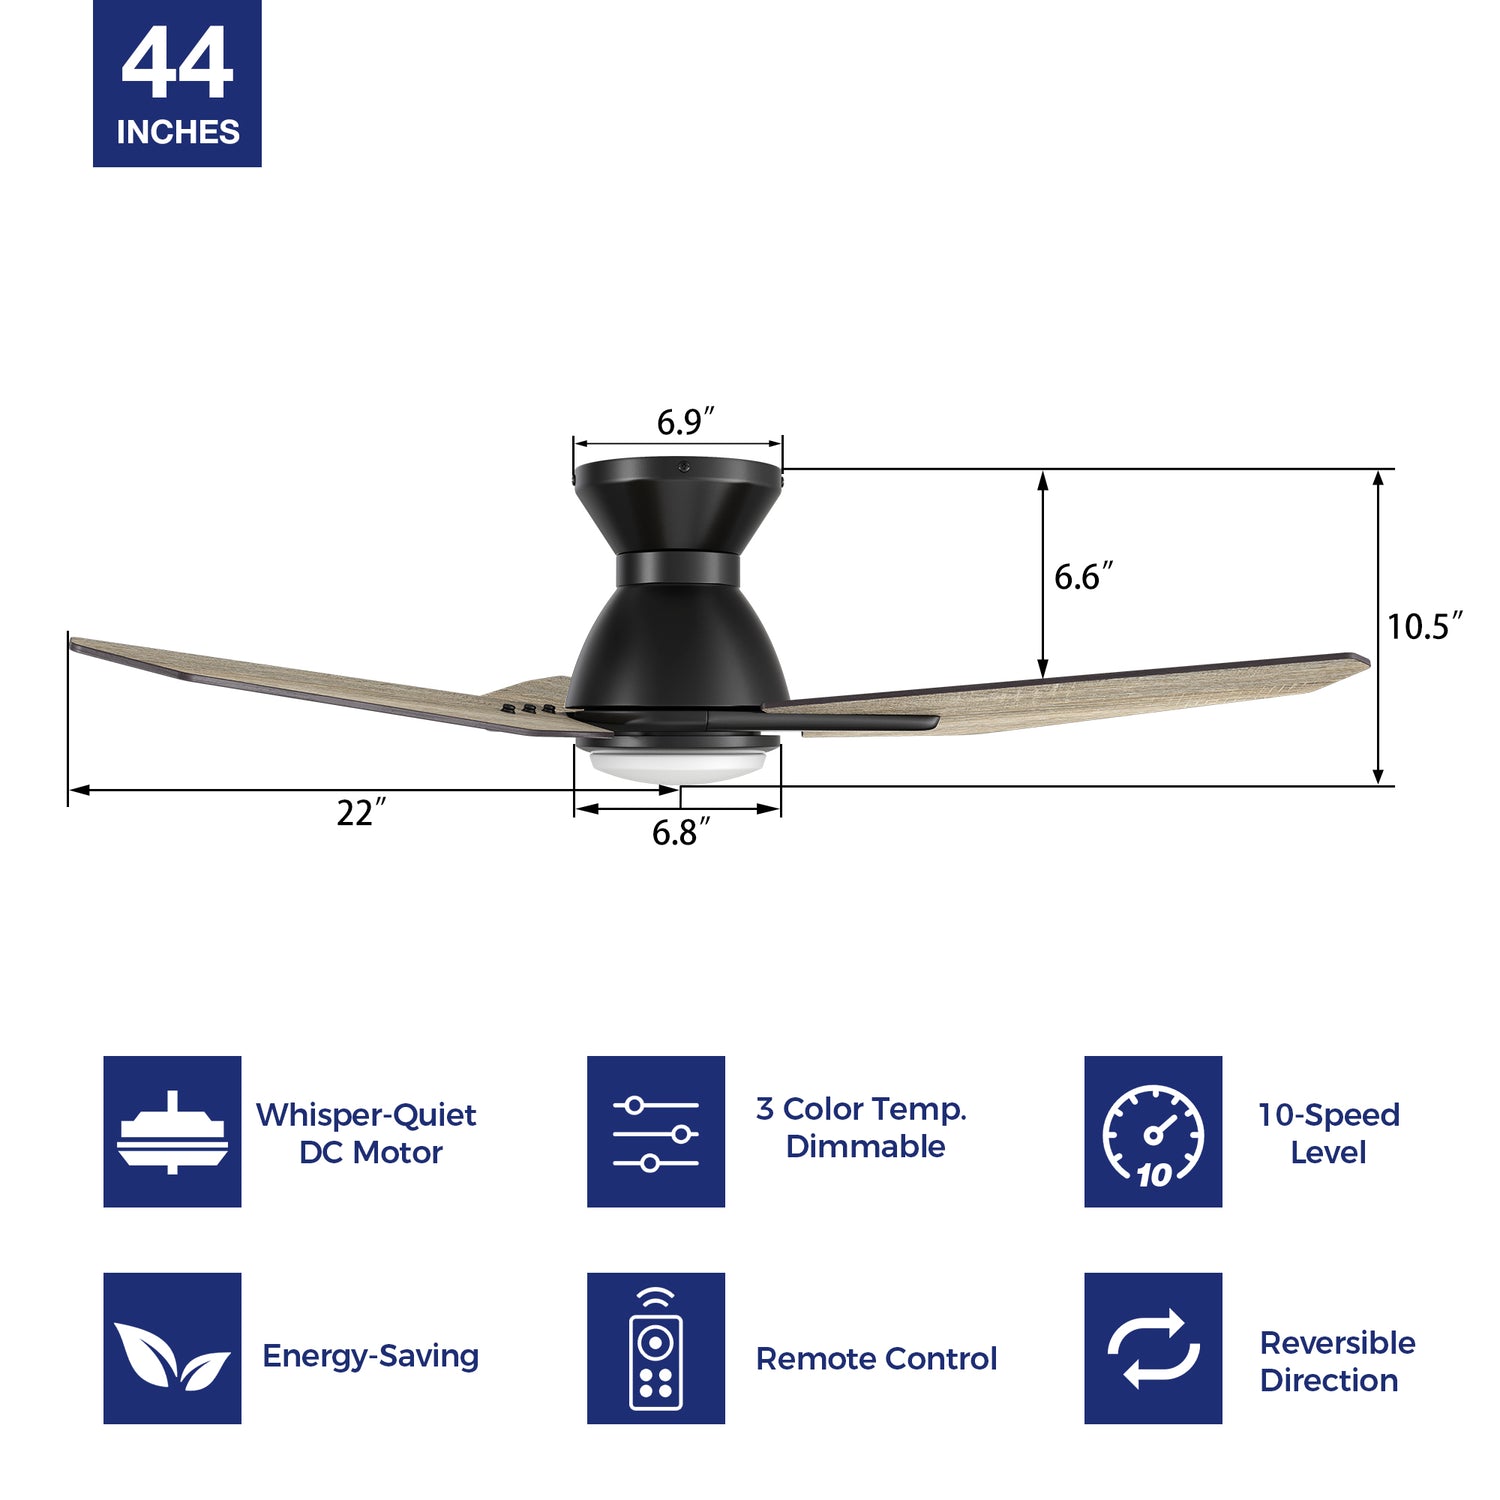 Detail size of Carro Smafan Vant 44 inch ceiling fan with light, low profile design with 3 wooden plywood blades. 